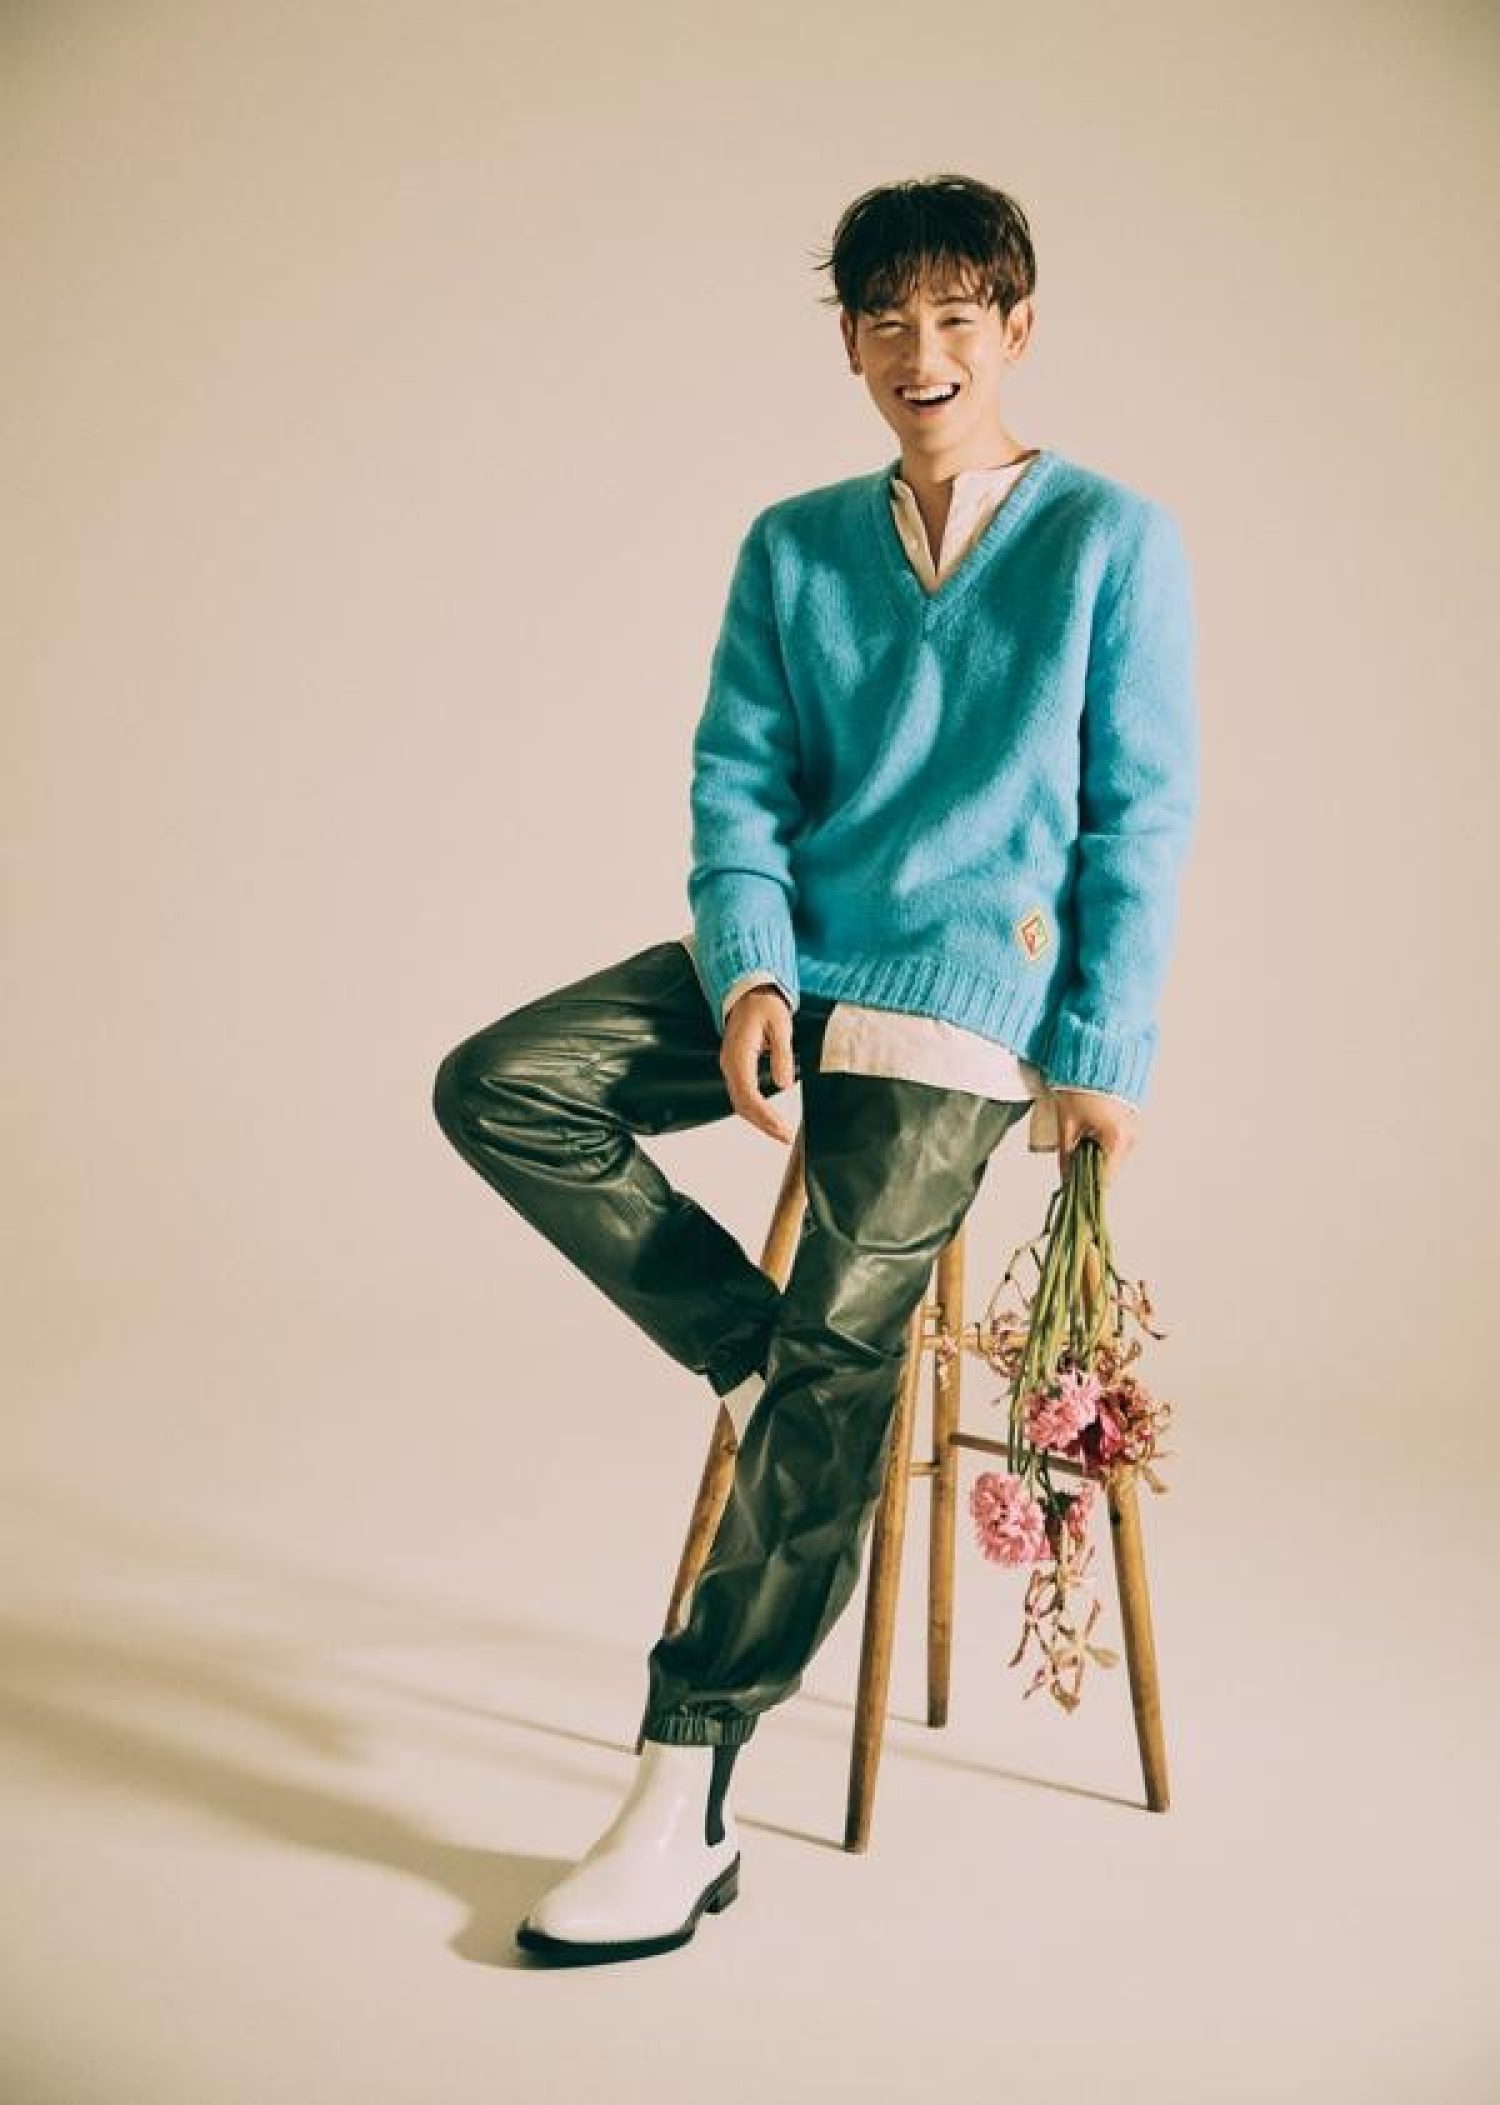 Eric Nam seated with a bouquet of flowers